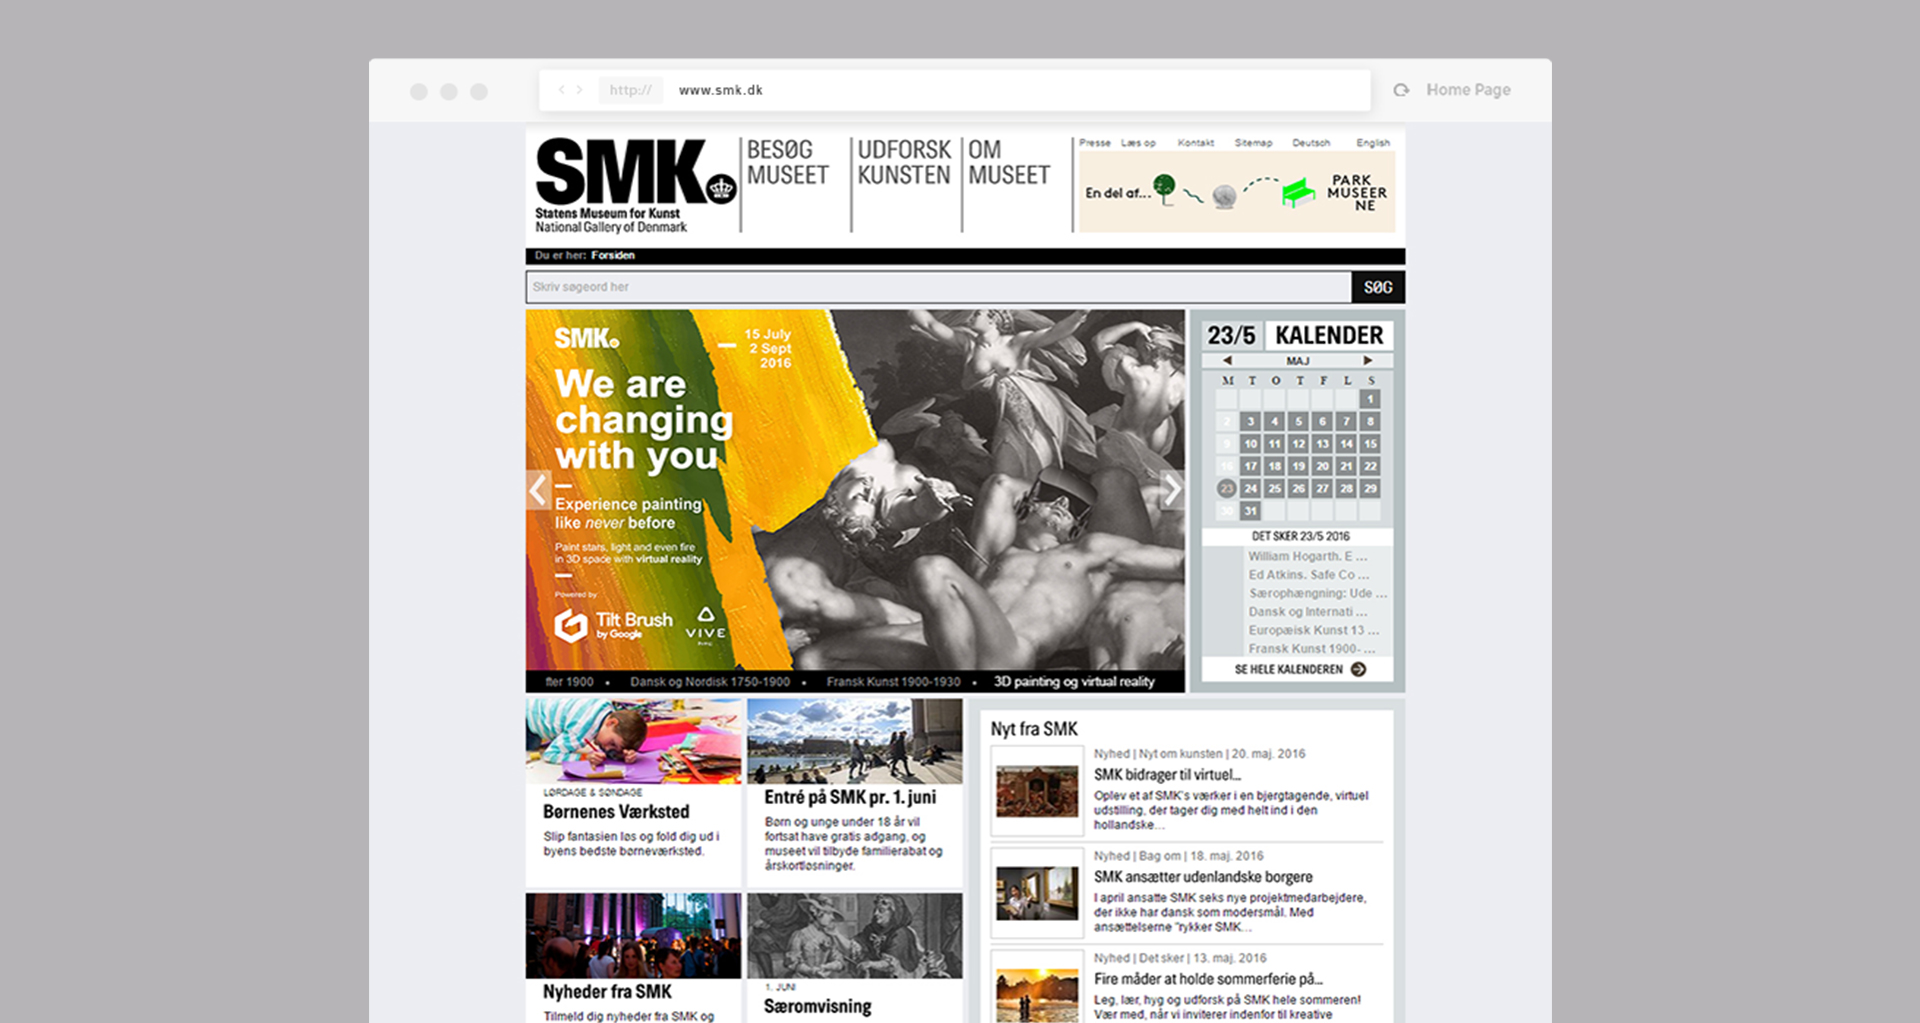 
SMK website with event banner
